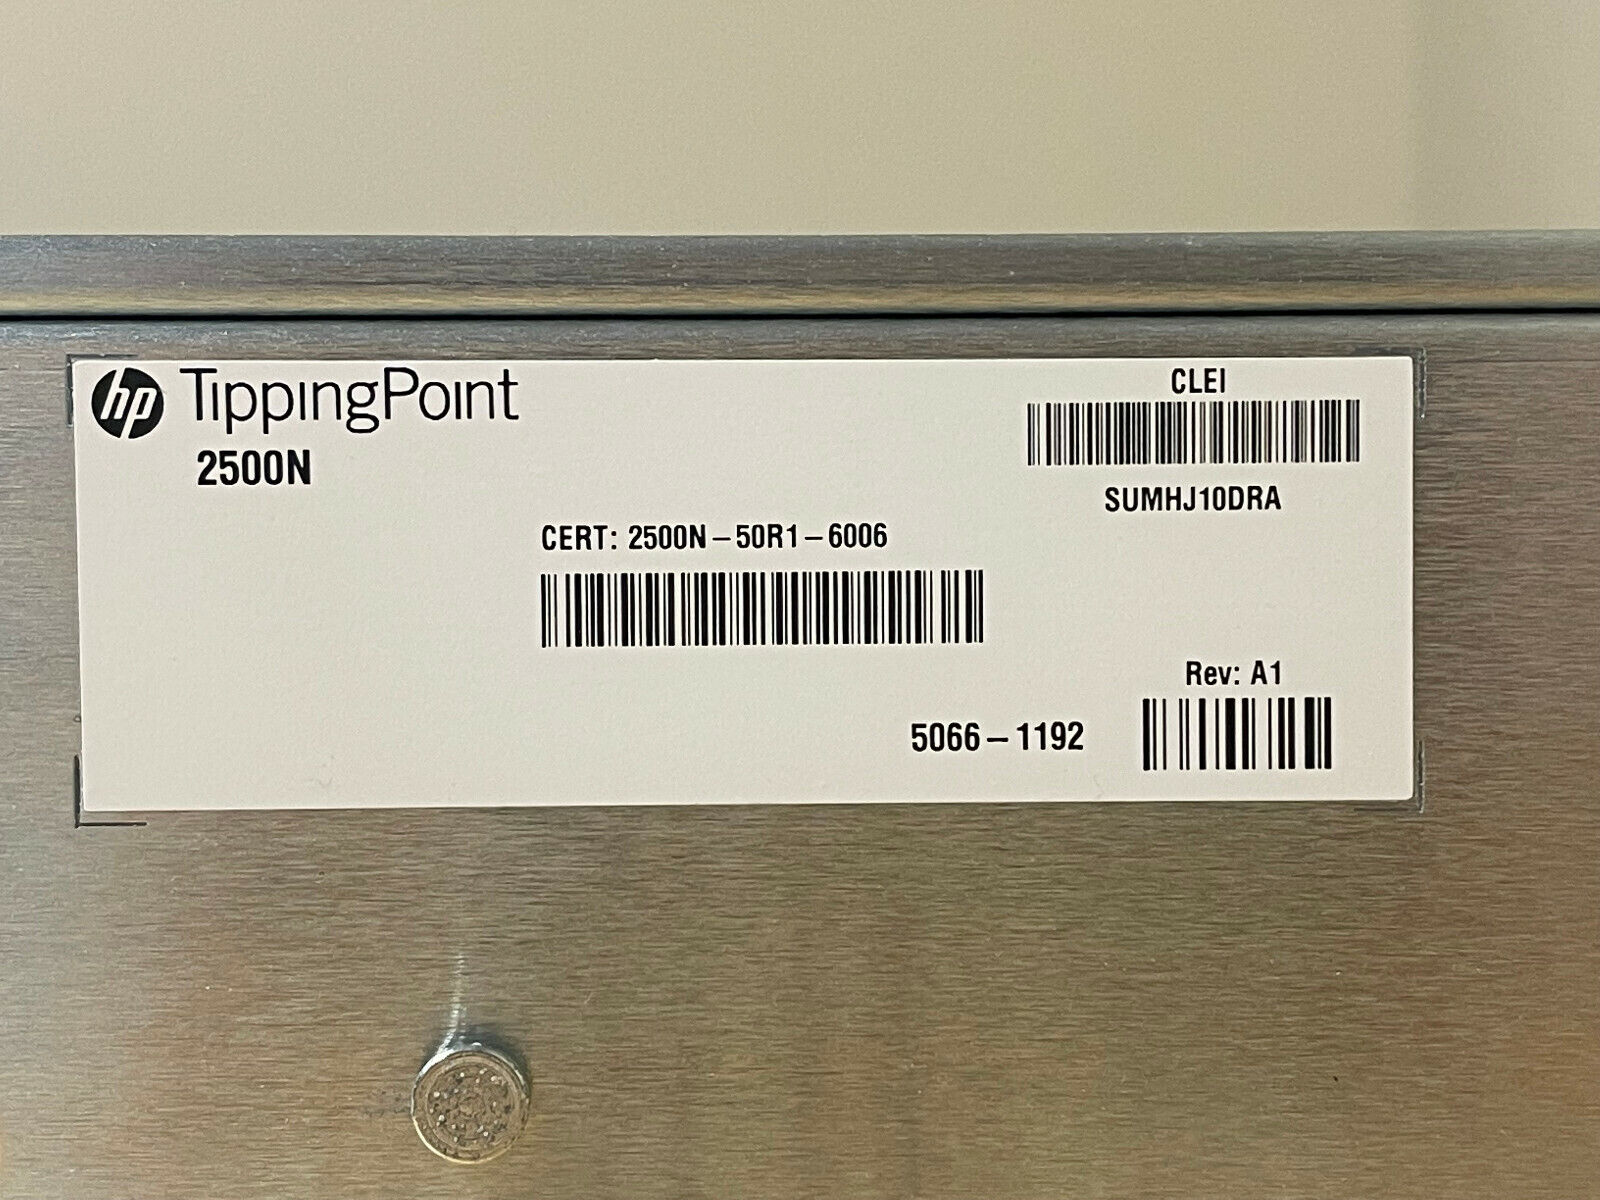 HP JC021A TippingPoint S2500N 2500N-50R1-6006 IPS Intrustion Prevention System 10x RJ45 10x SFP 2x XFP.